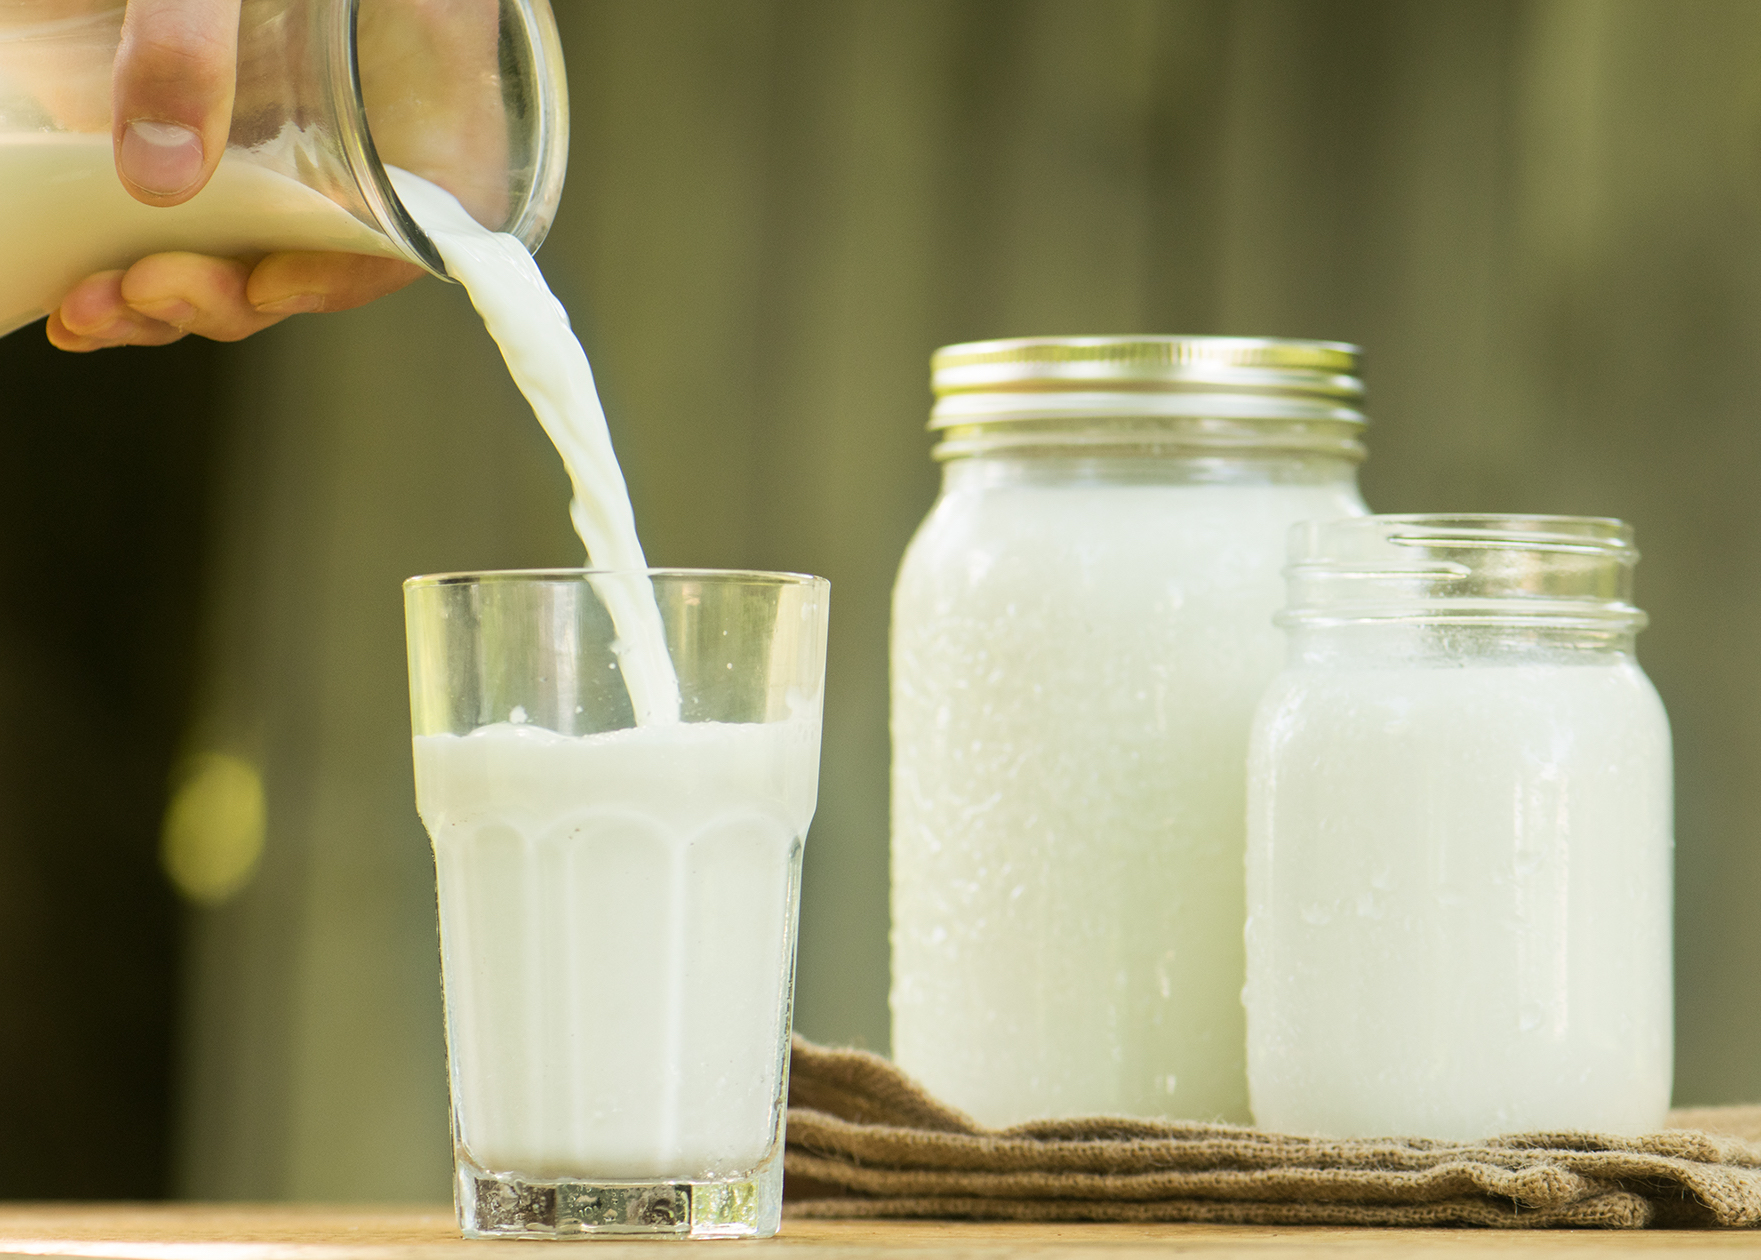 Milk | 10 Healthy Foods That Are Poisonous When Eaten Wrong | Her Beauty